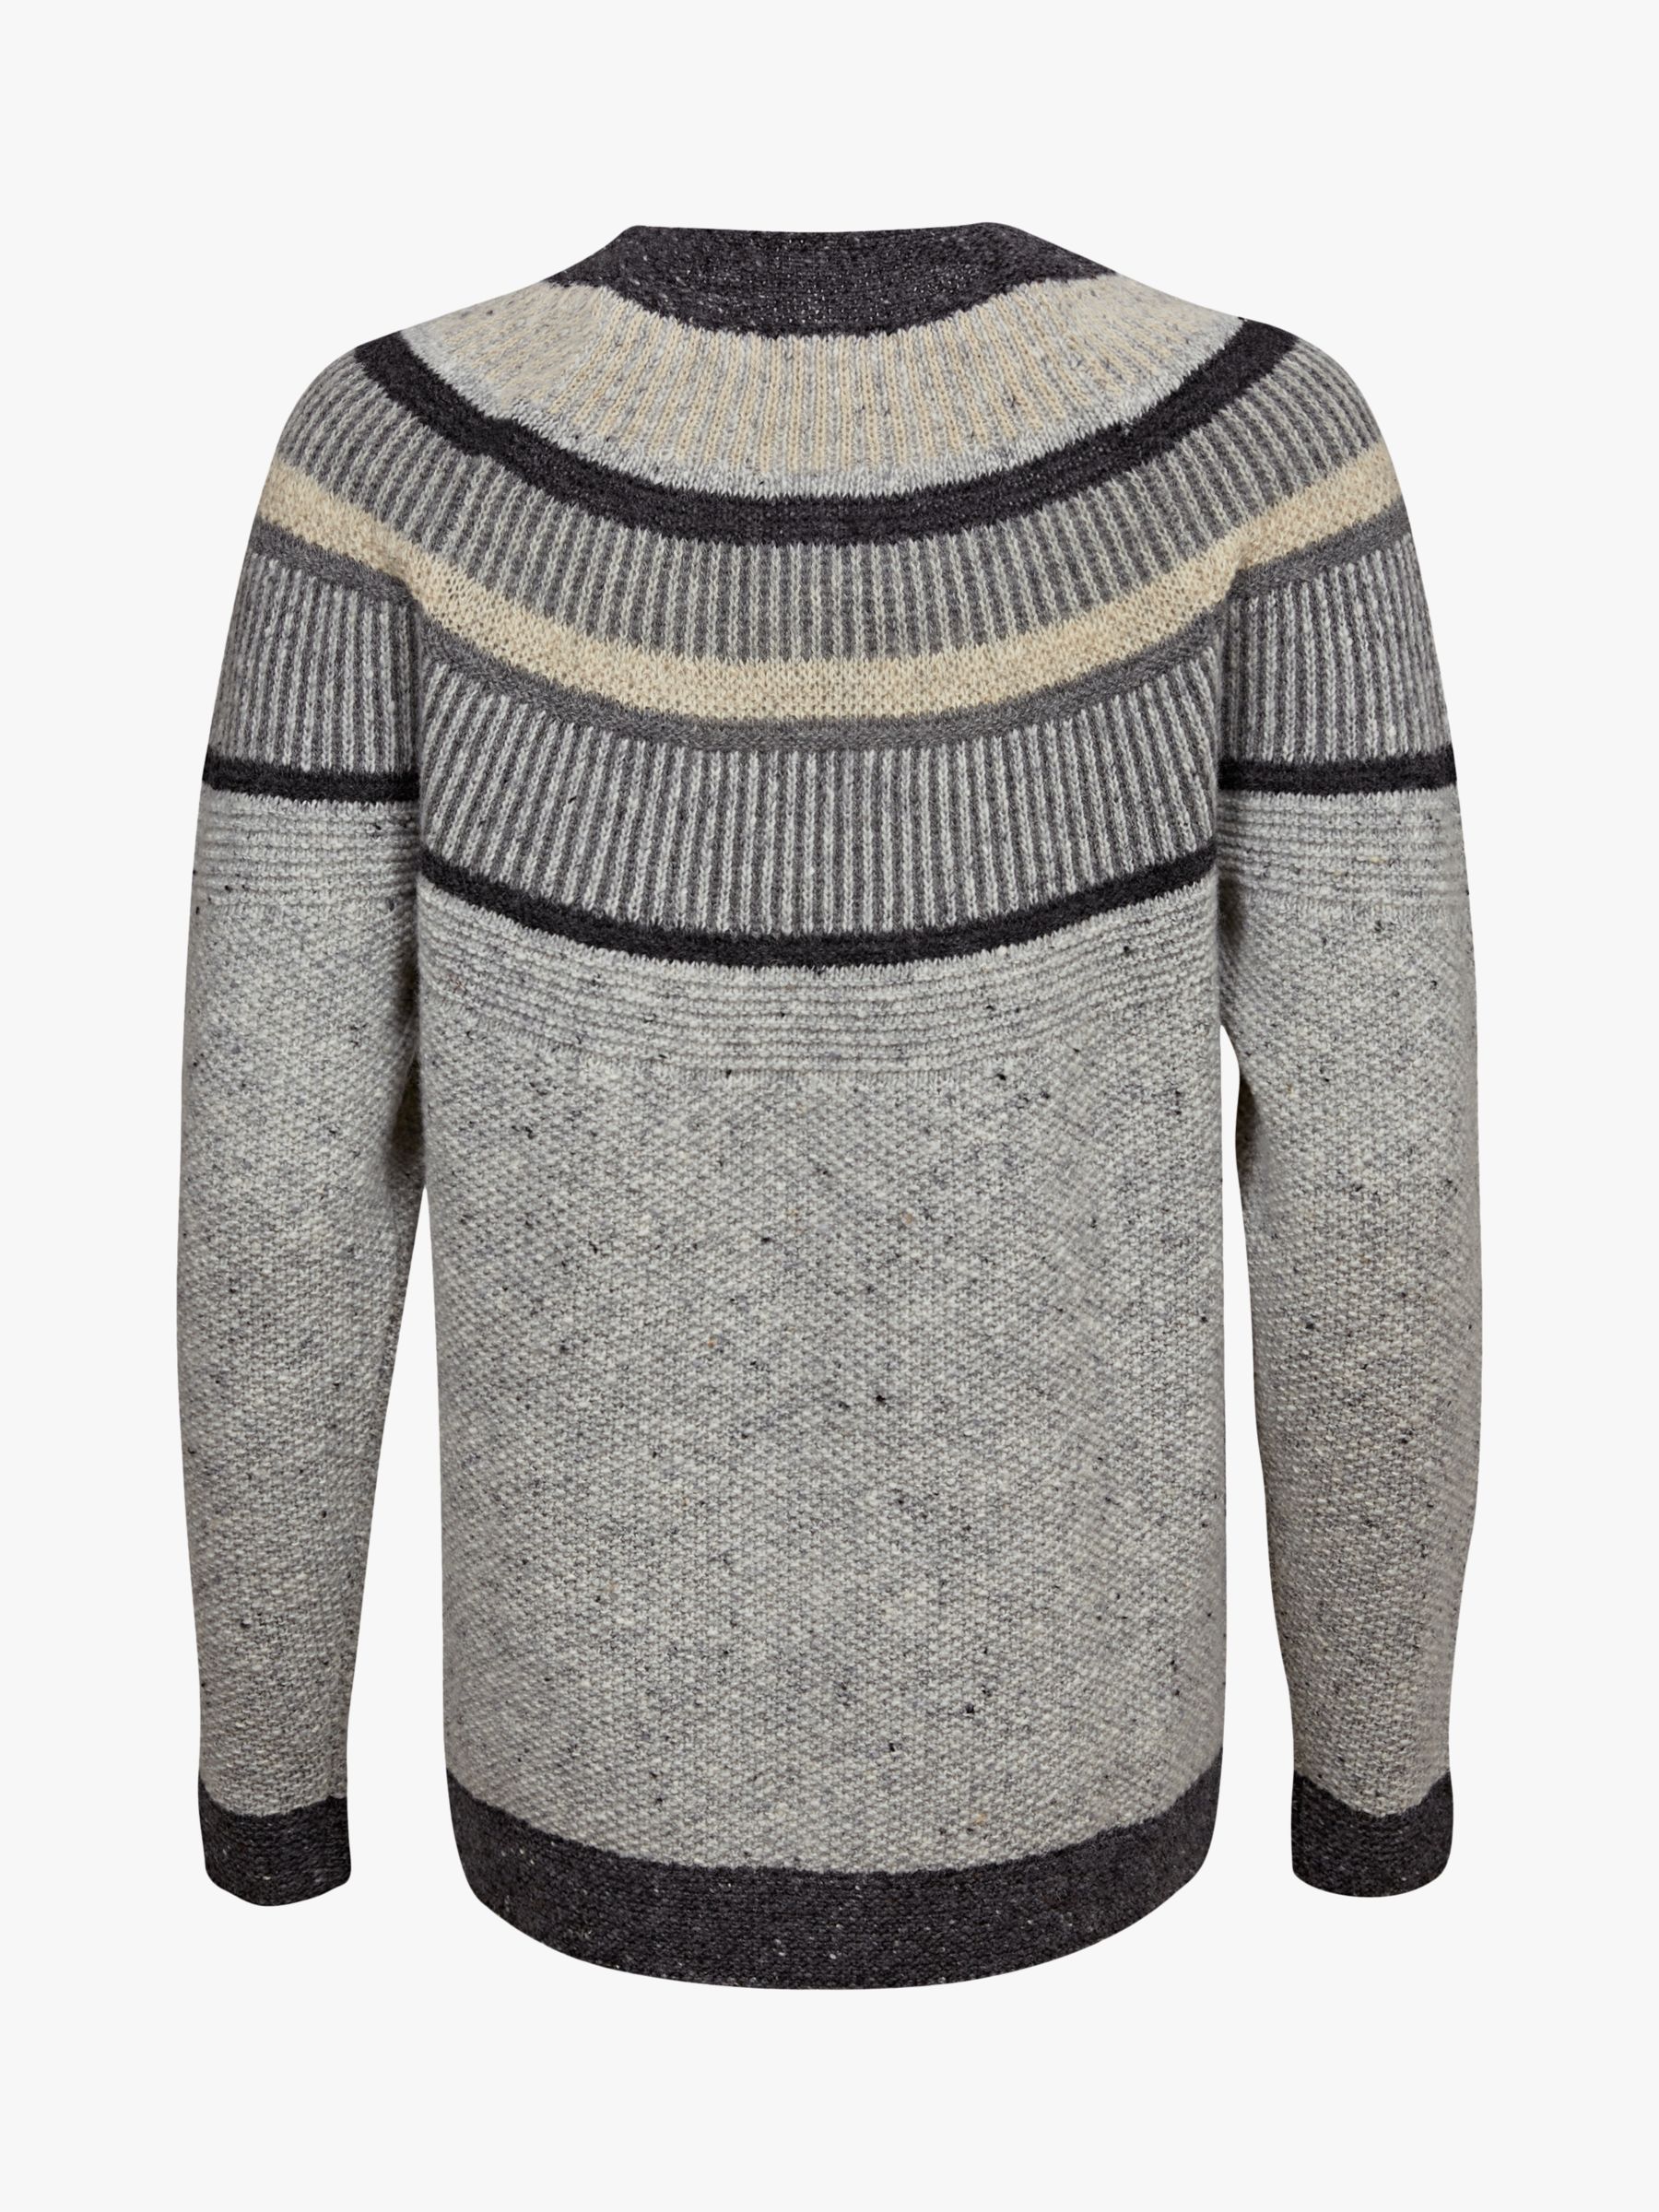 Celtic & Co. Statement Donegal Wool Jumper at John Lewis & Partners